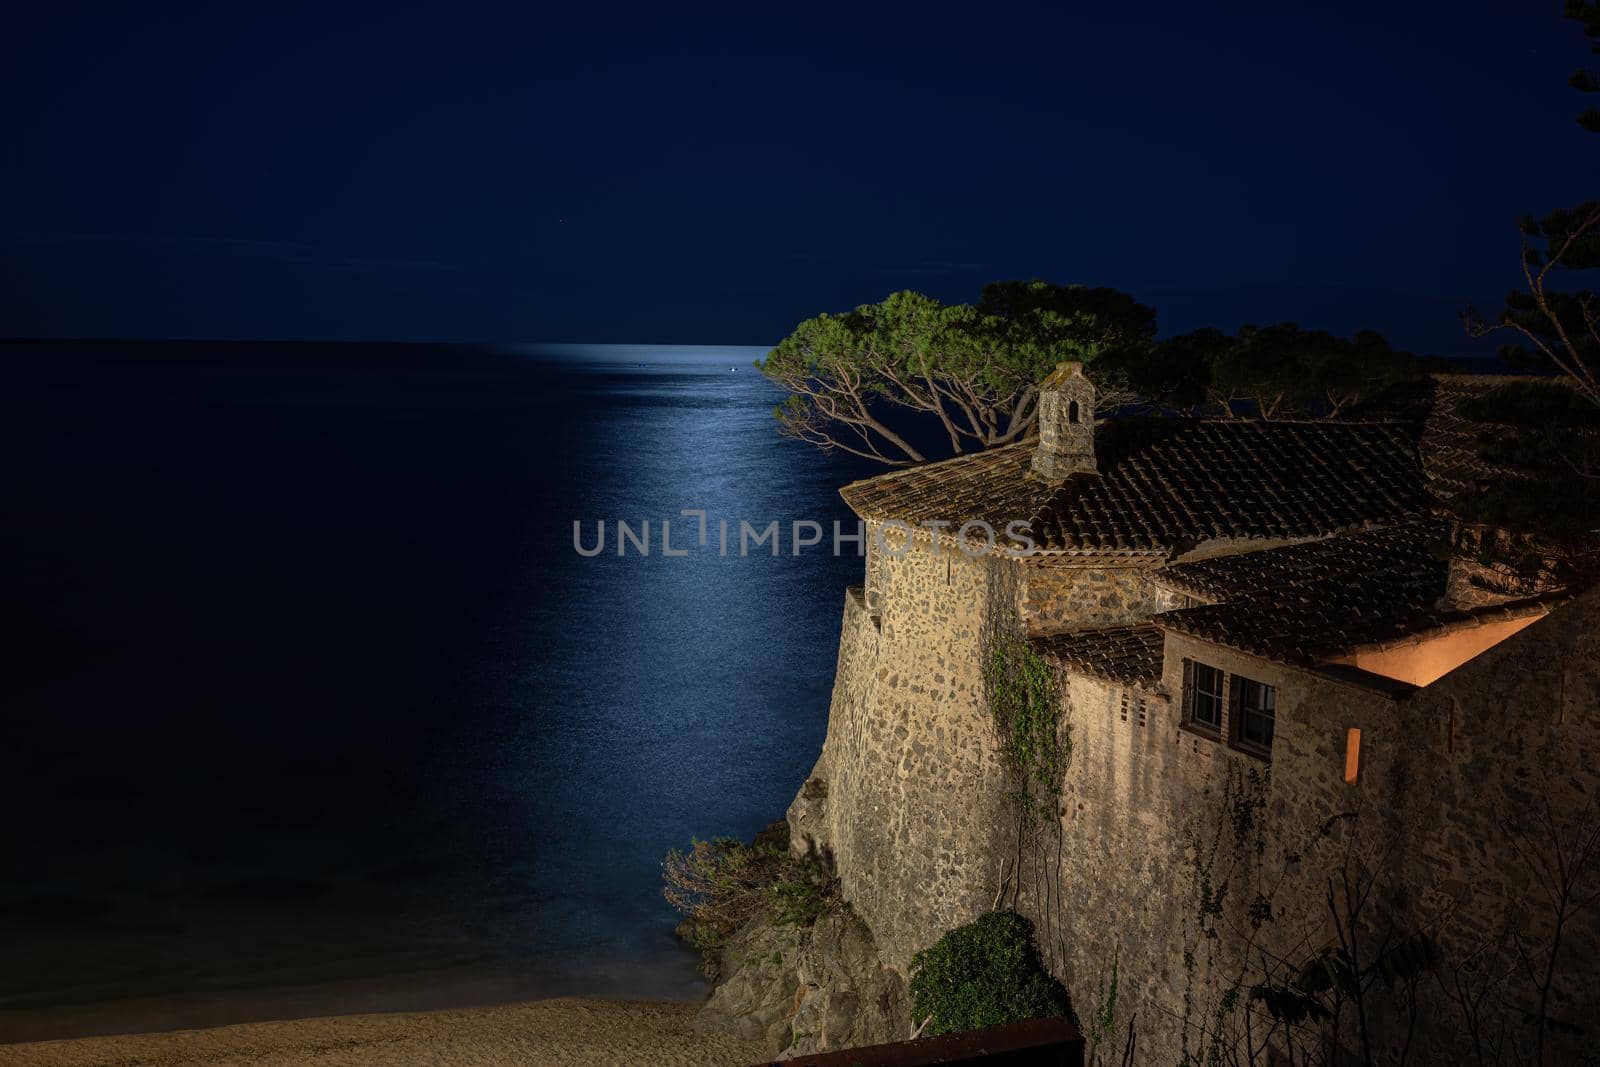 Night scene , long exposure picture from a traditional building in Spanish Costa Brava, village Calella de Palafrugell by Digoarpi